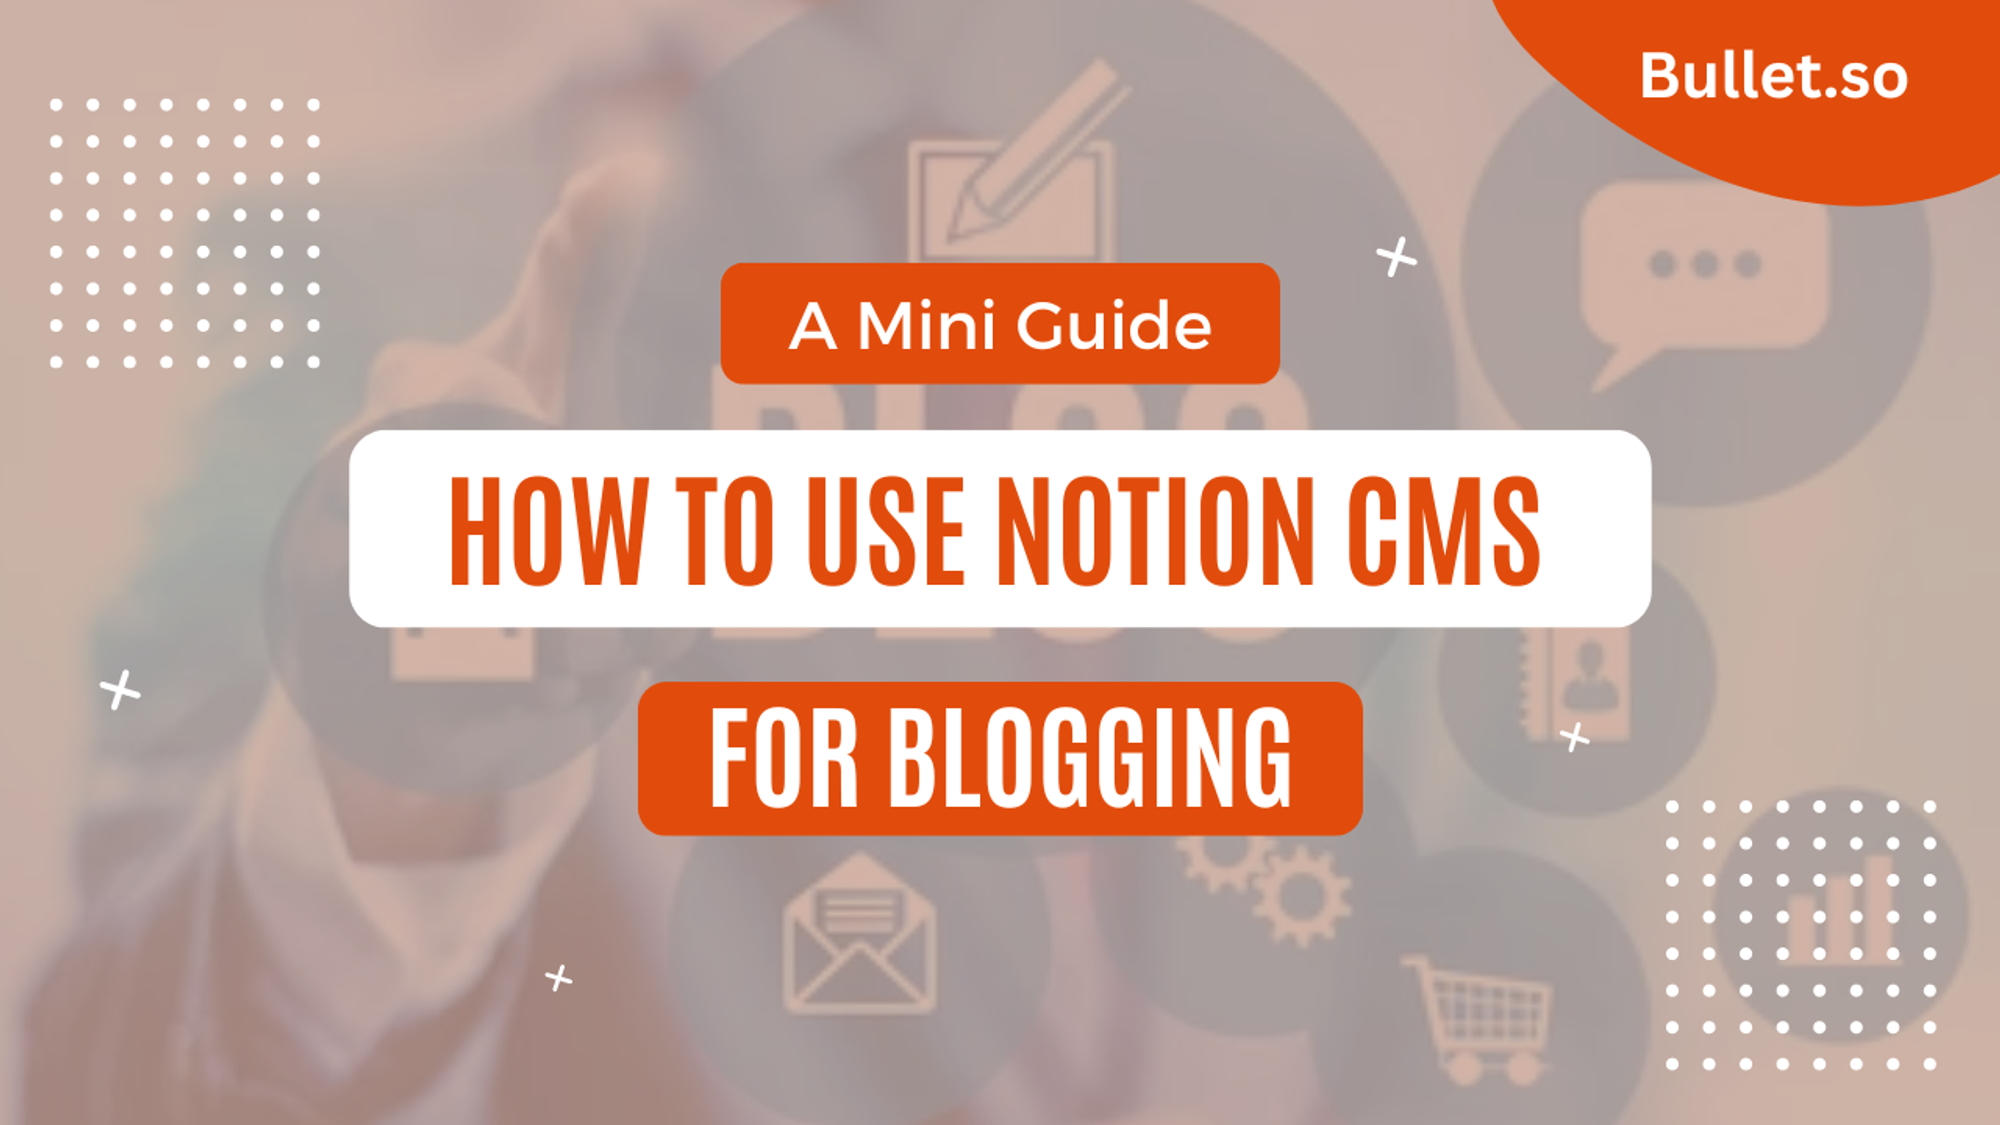 How to use Notion CMS for blogging